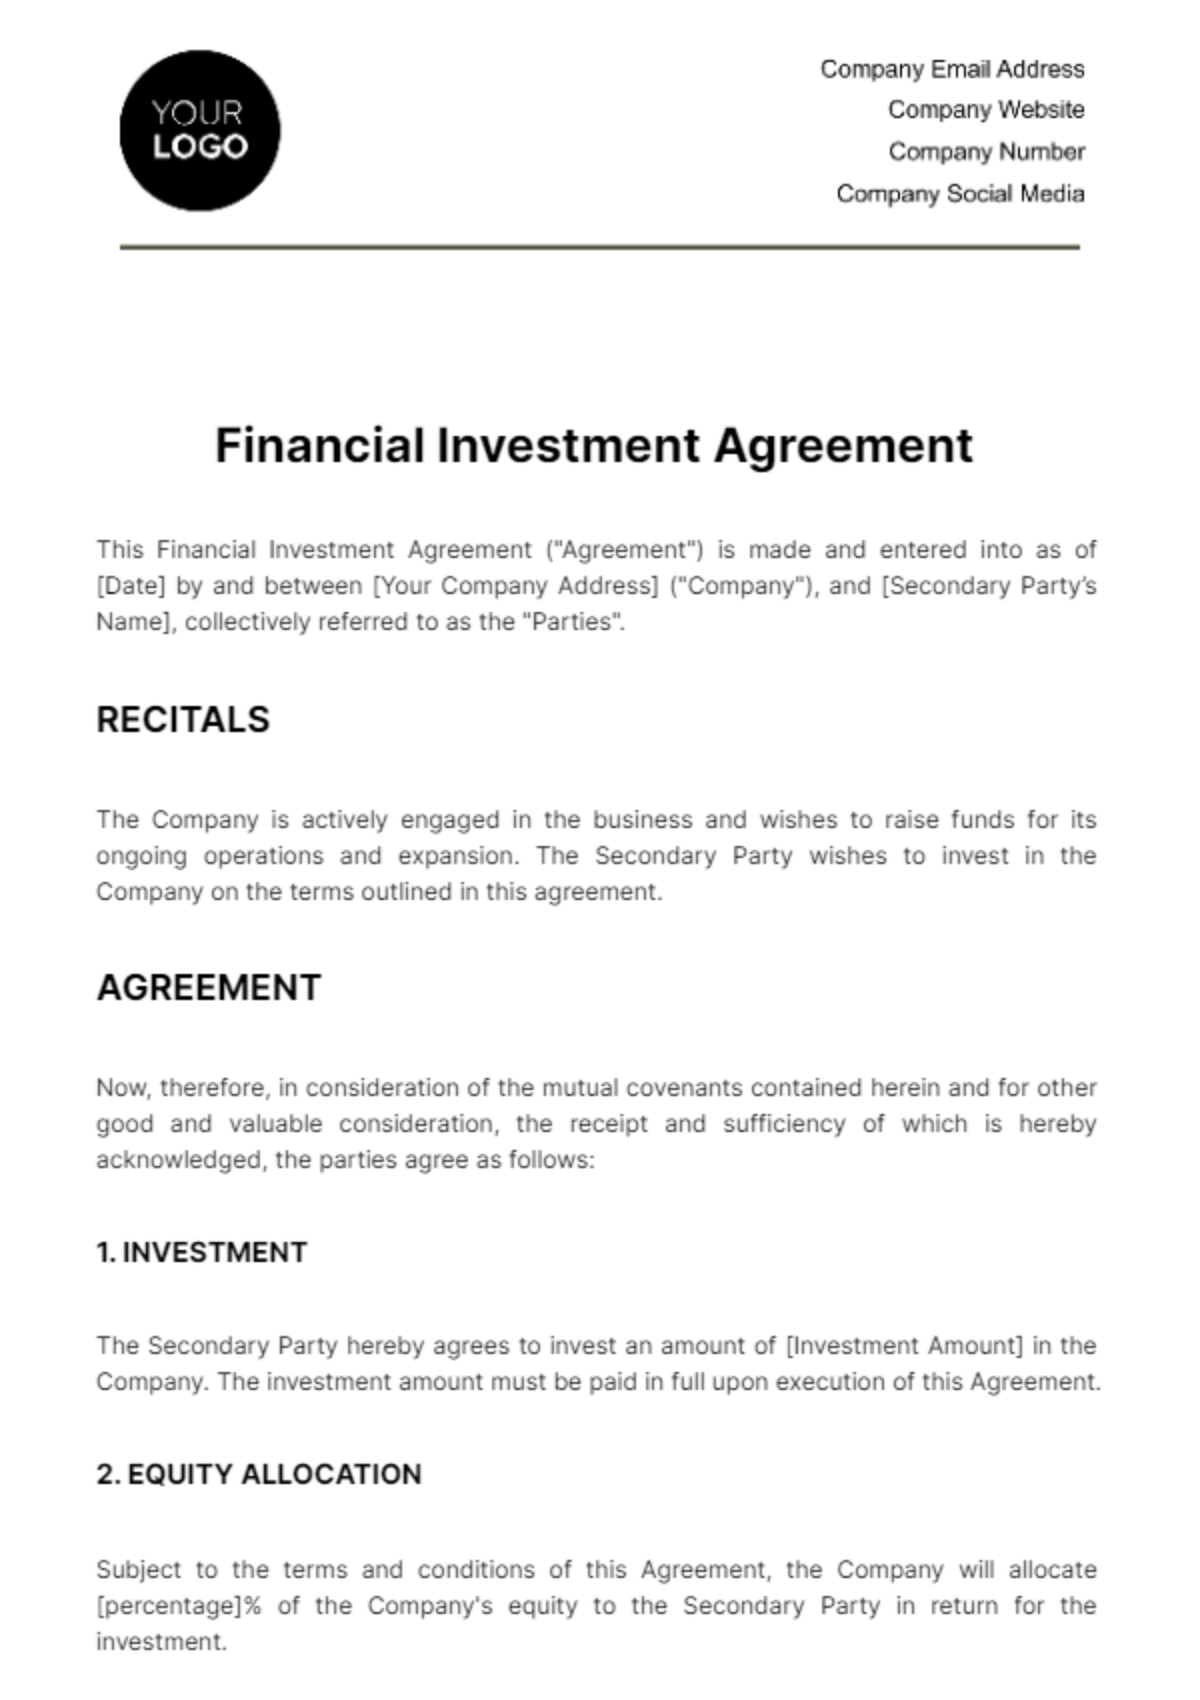 Free Financial Investment Agreement Template